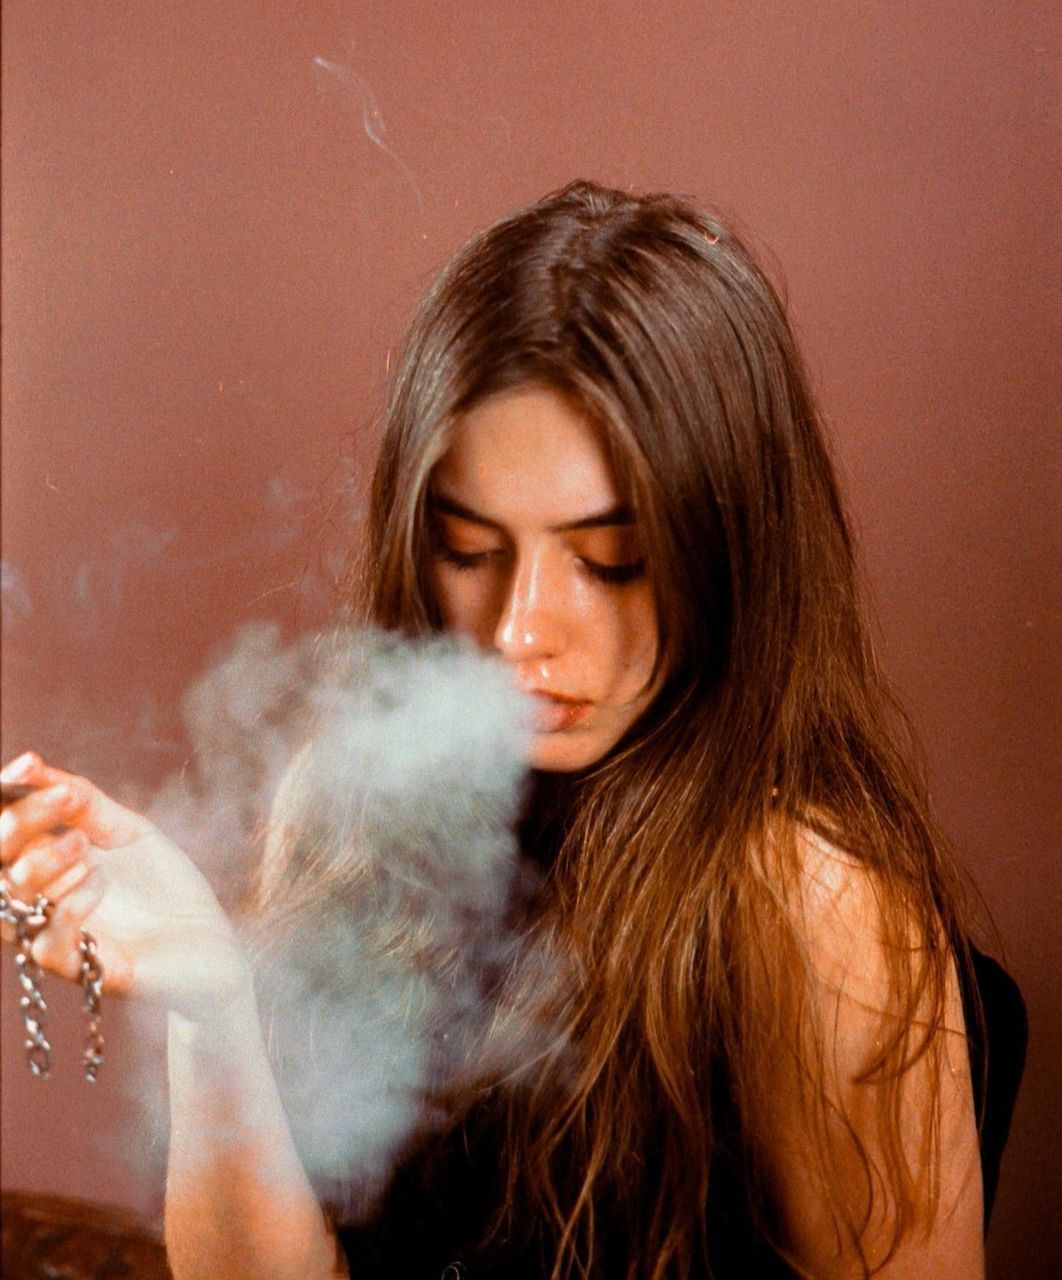 smoke, one person, smoking, human hair, women, adult, young adult, female, long hair, smoking issues, portrait, hairstyle, cigarette, headshot, indoors, holding, skin, nose, activity, bad habit, photo shoot, person, blond hair, social issues, human face, brown hair, fashion, human head, lifestyles, hand, eyes closed, looking, human mouth, waist up, blowing